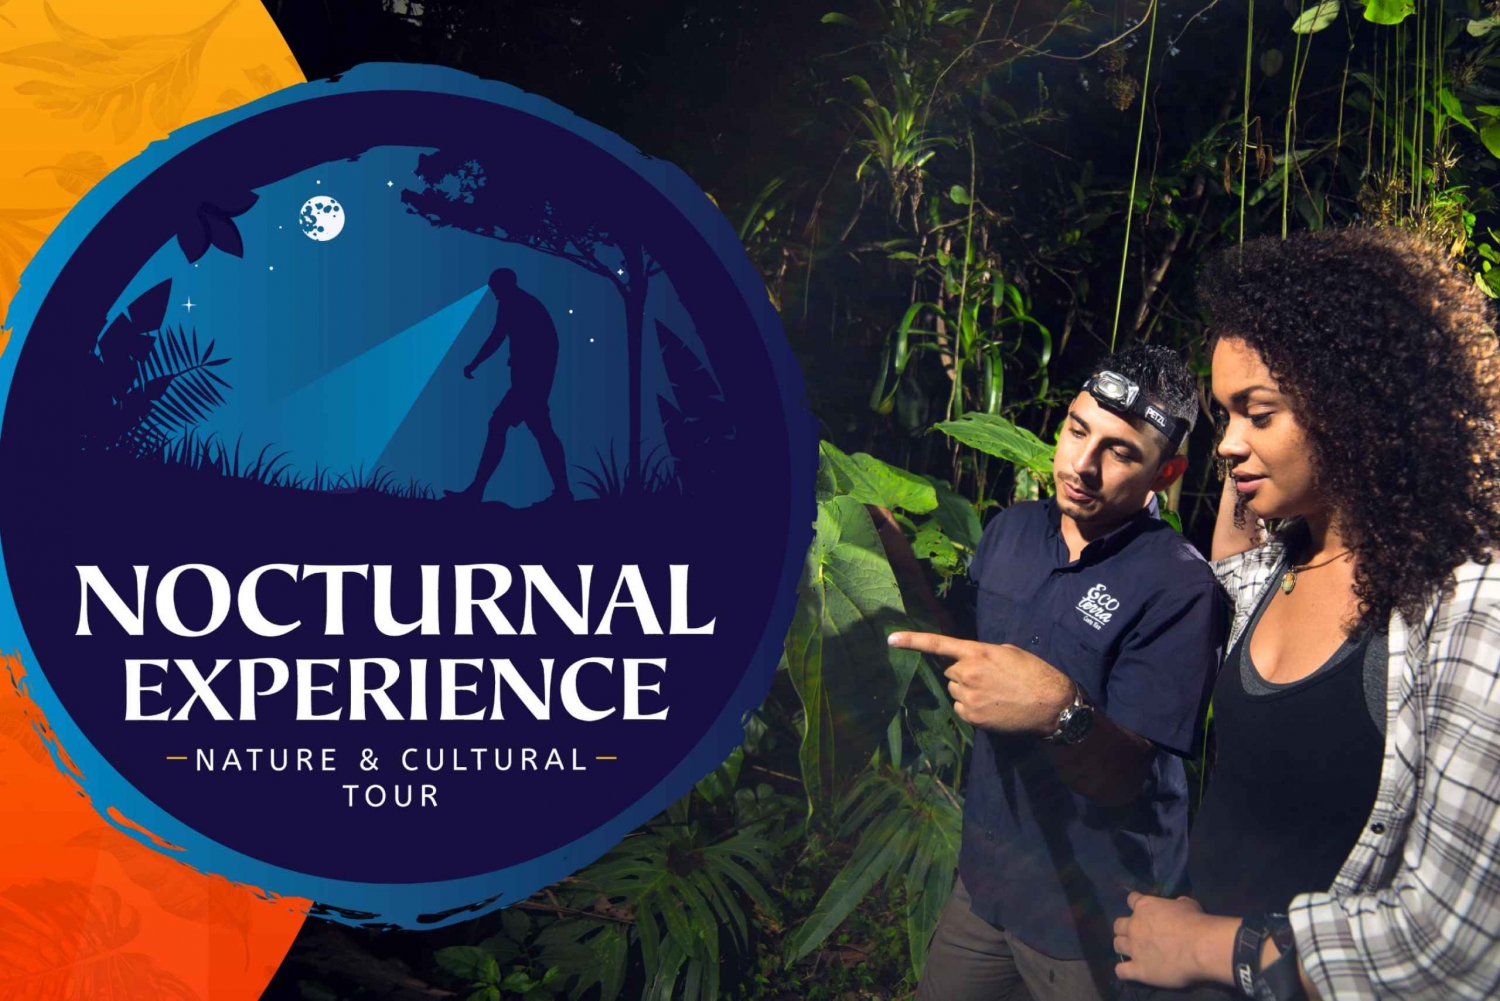 Fra La Fortuna: Nocturnal Nature Experience